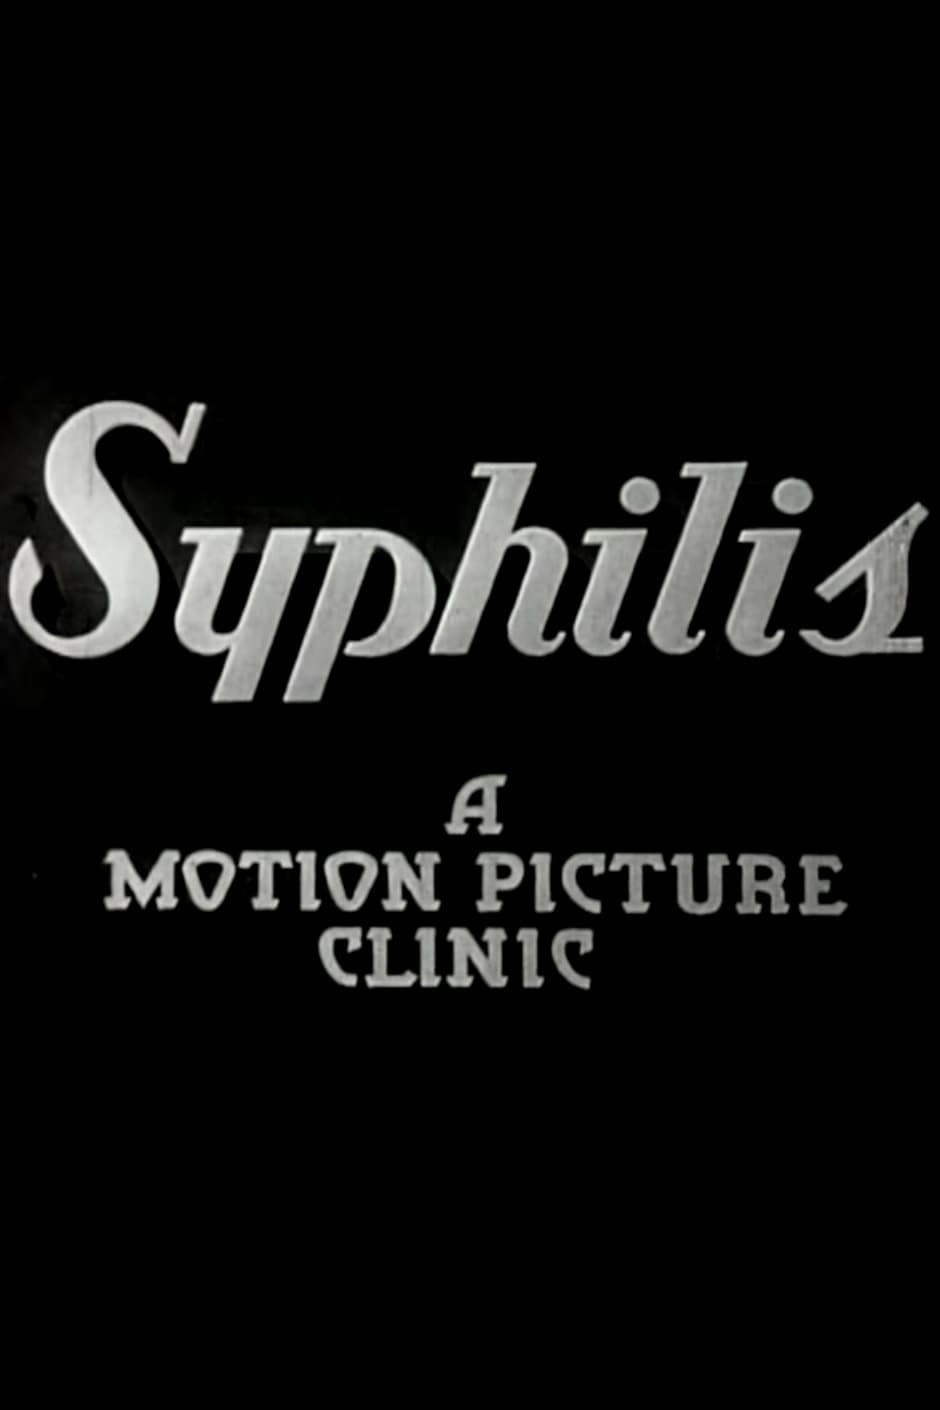 Syphilis: A Motion Picture Clinic